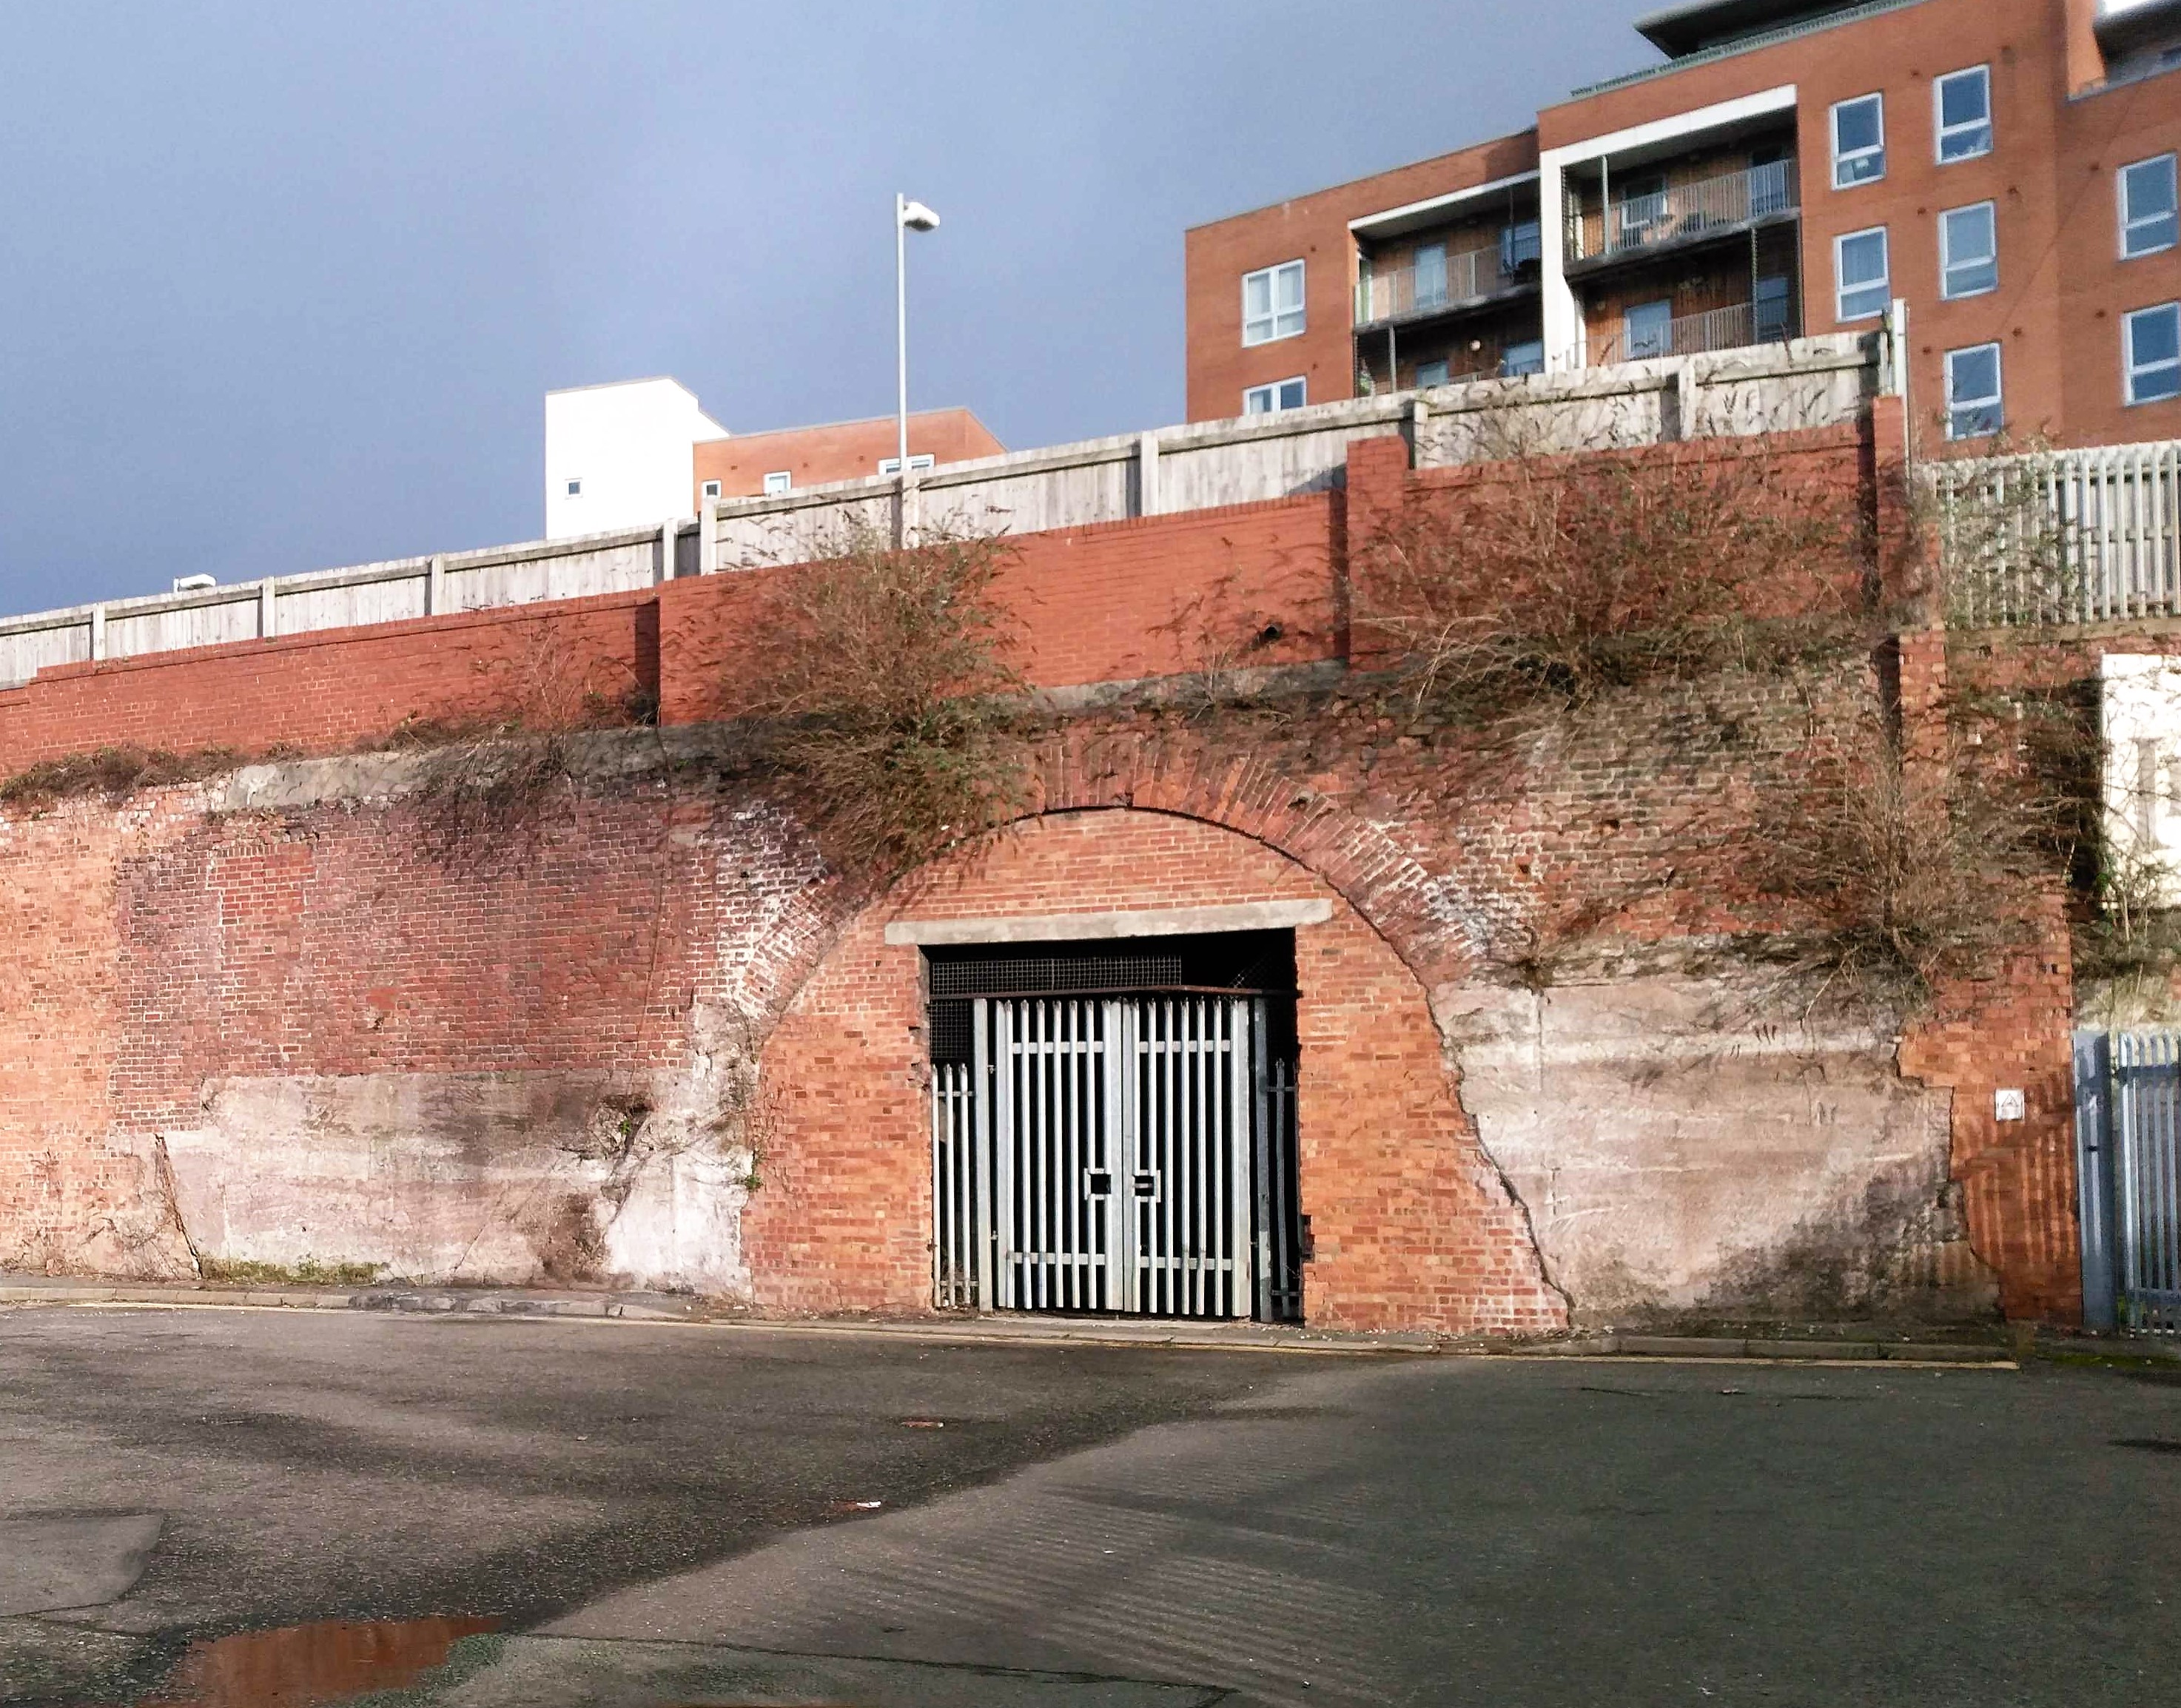 liverpool wapping portal 2019